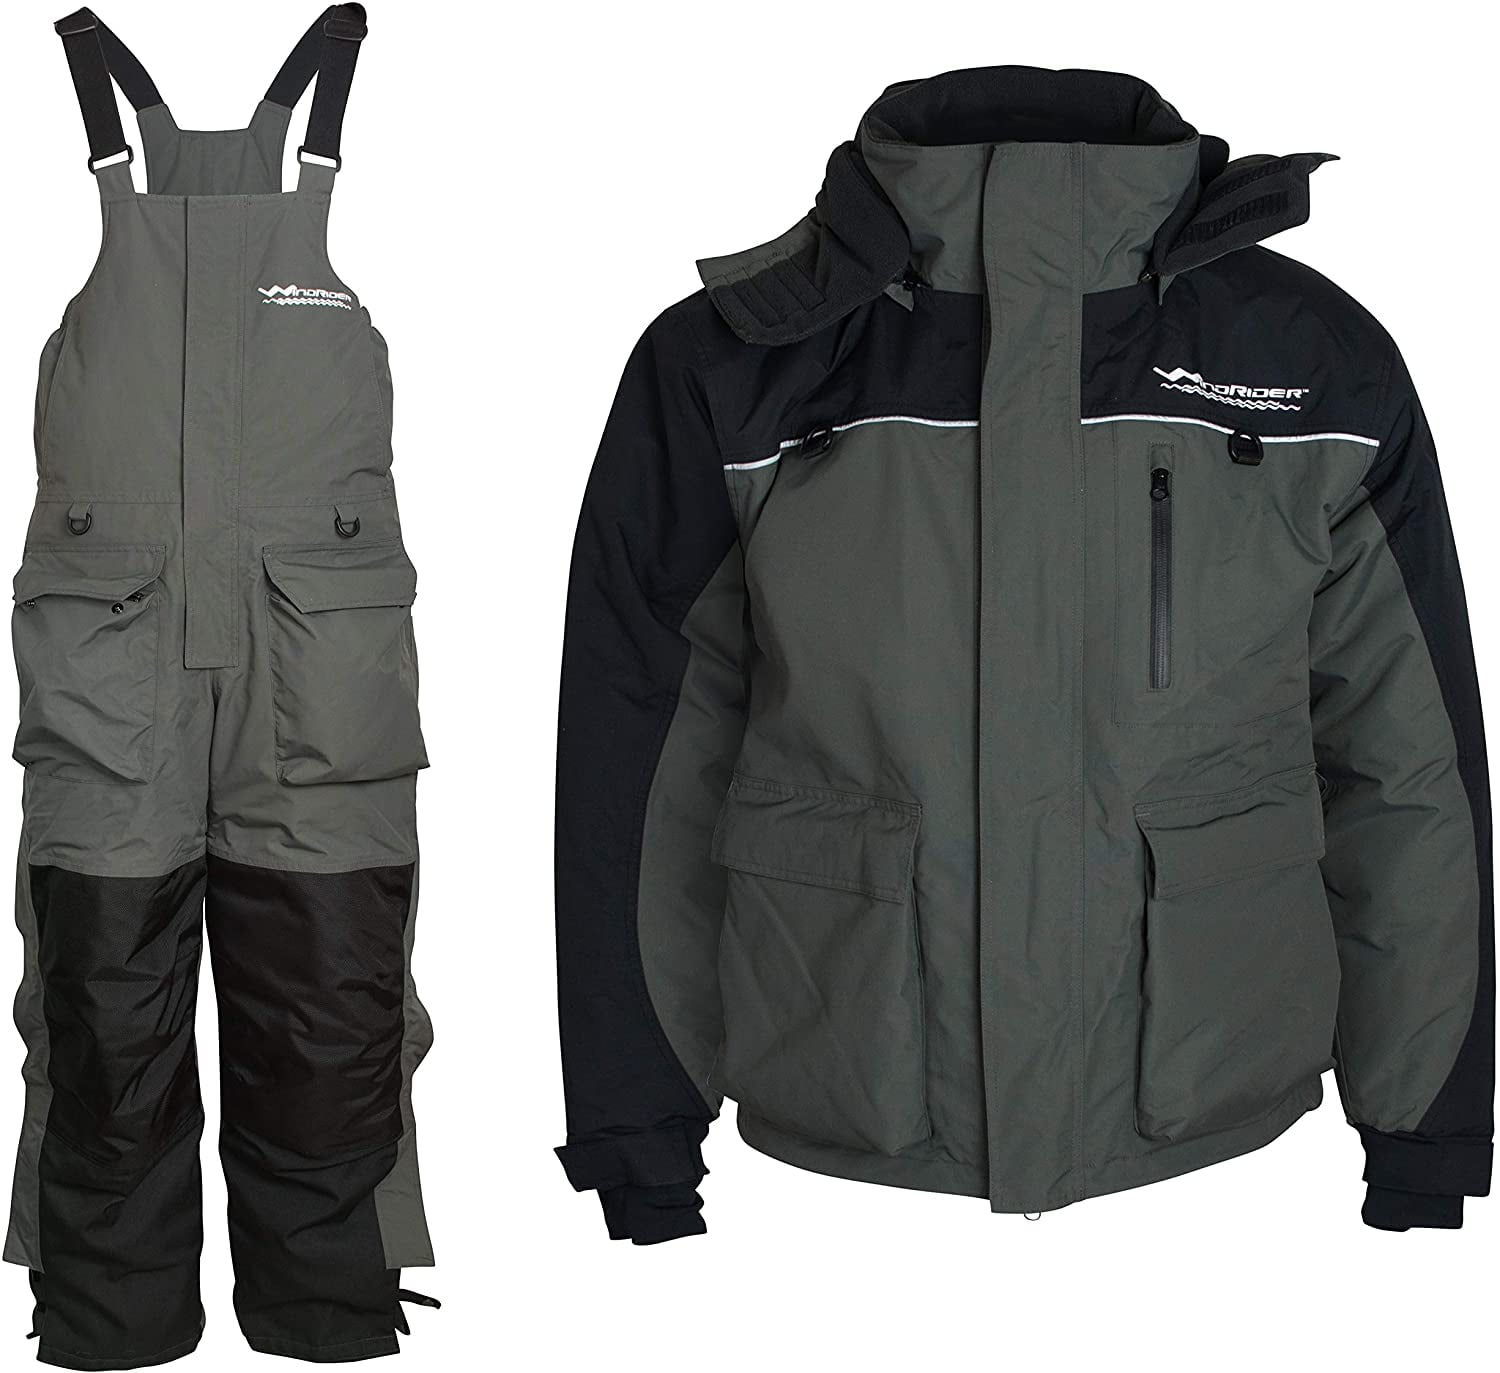 WindRider Ice Fishing Suit, Insulated Bibs and Jacket, Flotation, Tons of  Pockets, Adjustable Inseam, Reflective Piping